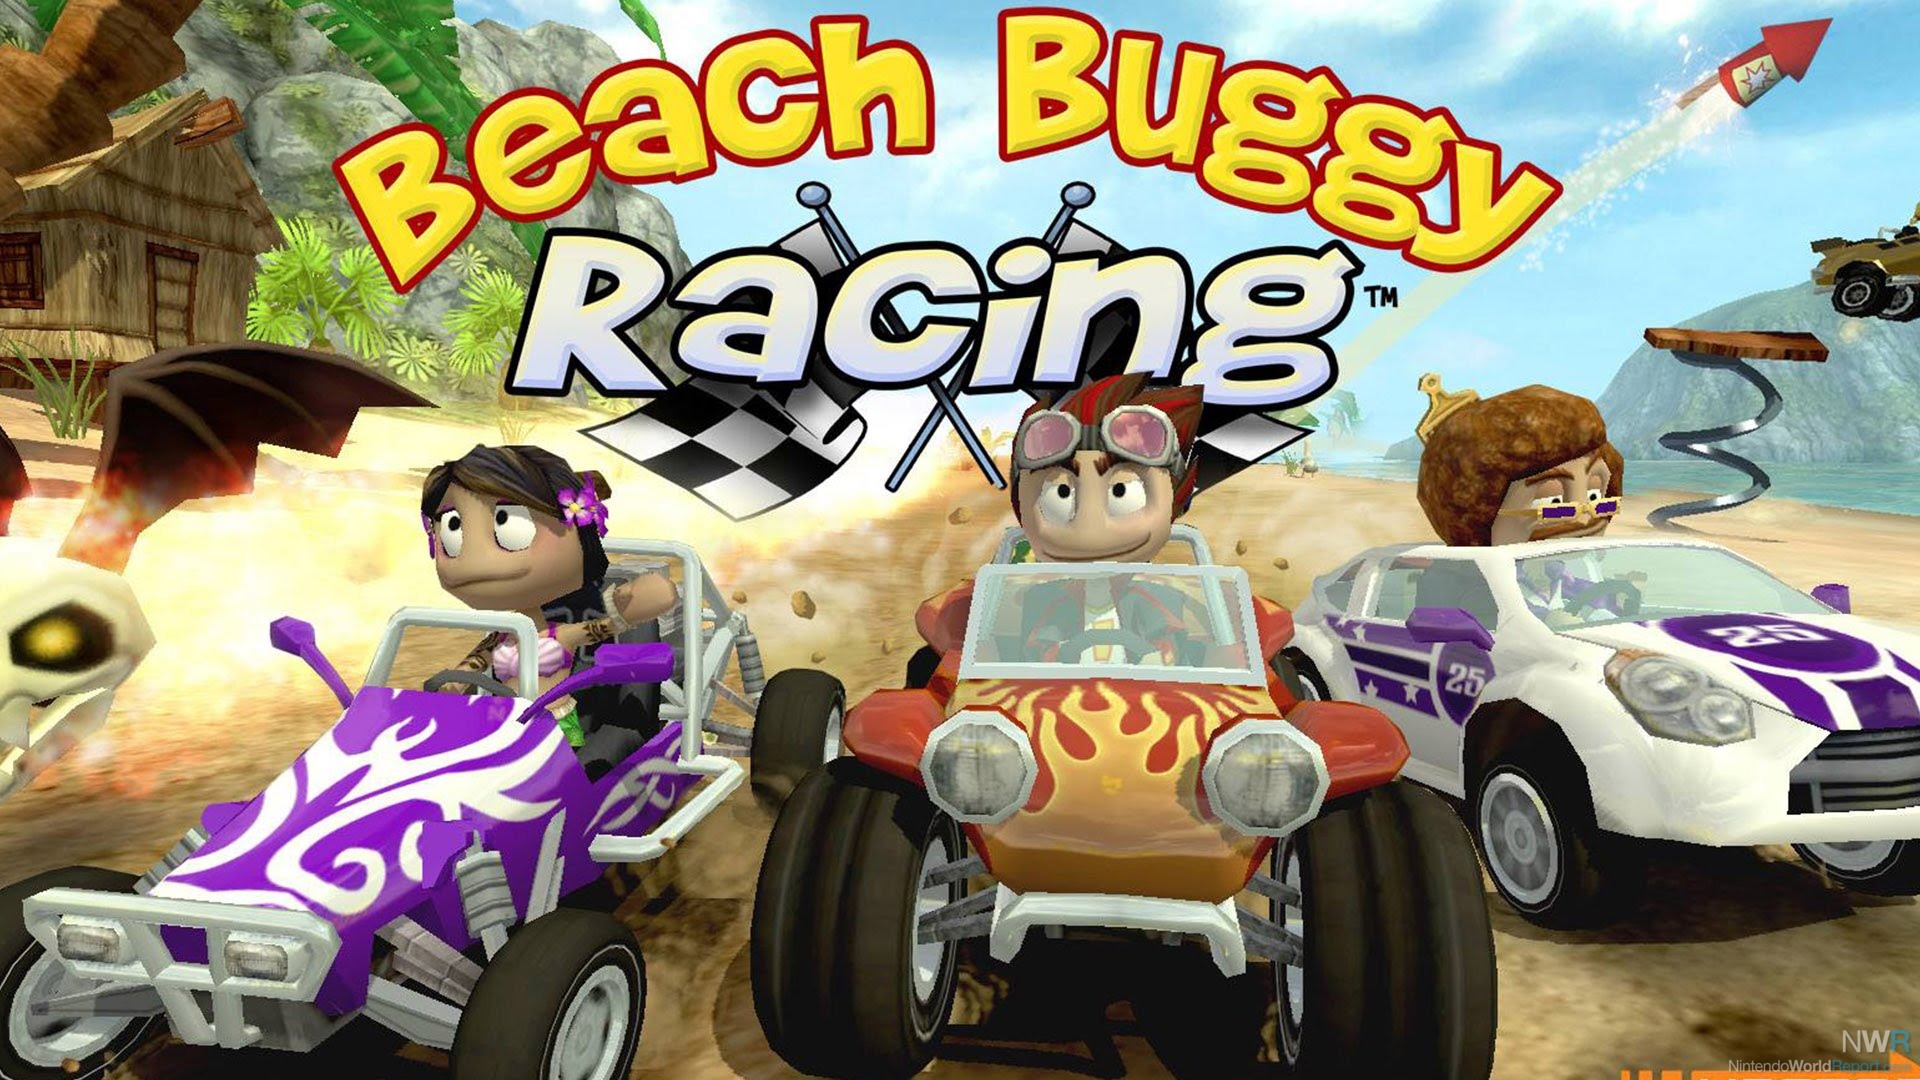 Beach Buggy Racing Review - Review - Nintendo World Report